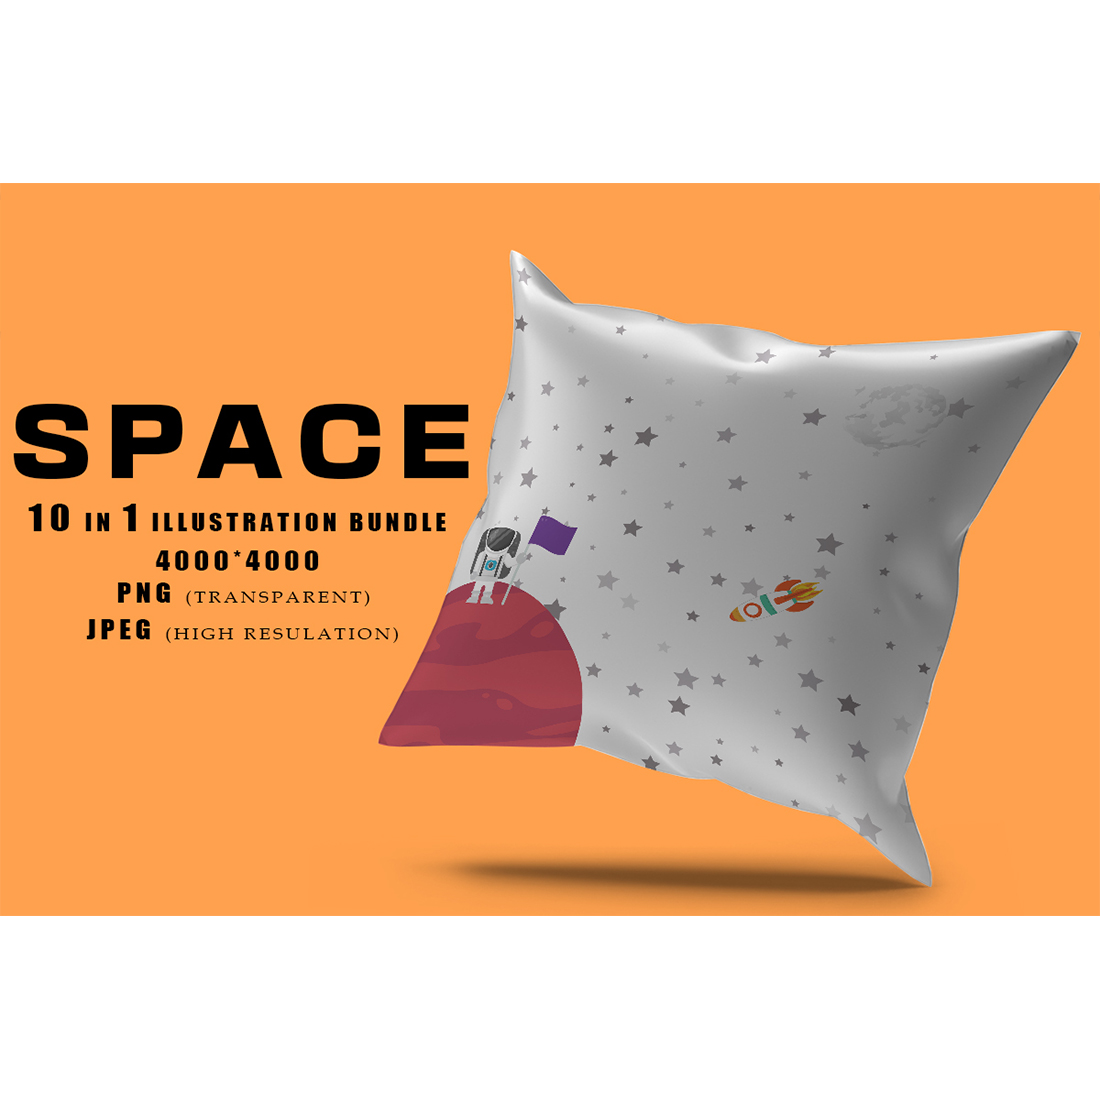 Image of a pillow with an irresistible space-themed print